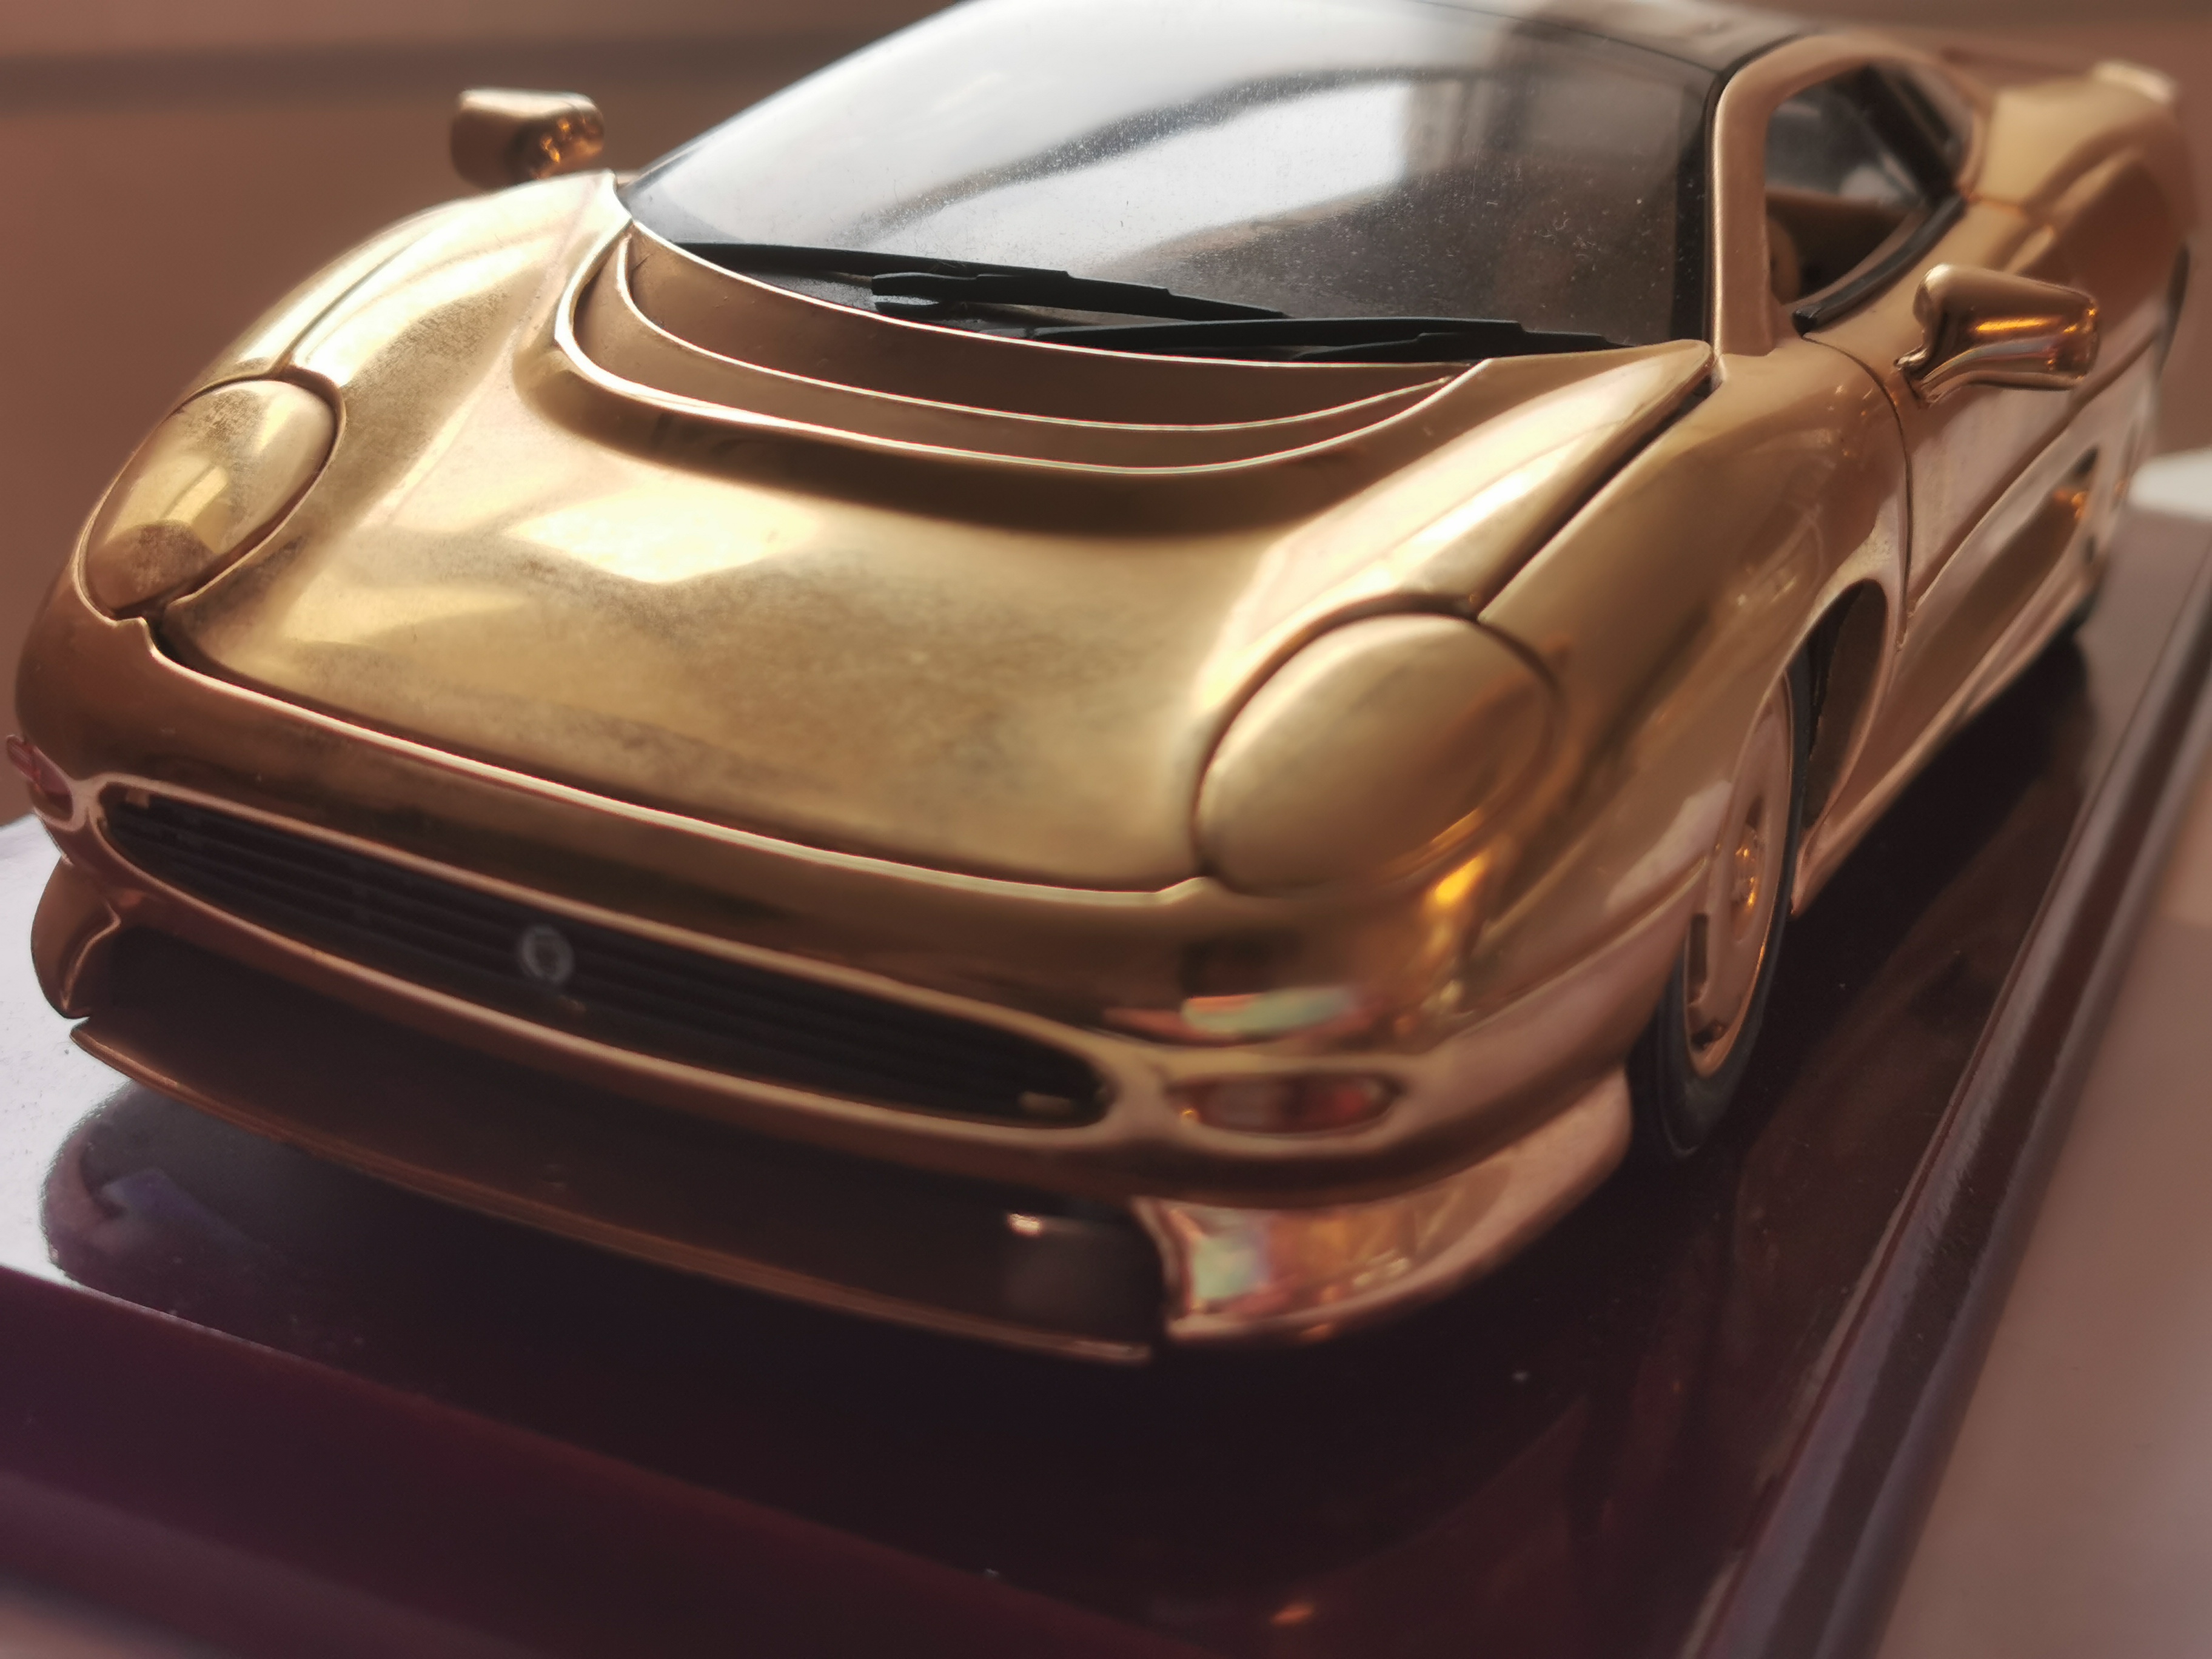 Jaguar XJ220 1:18 Scale Model Sports Car in 22ct Gold Plate - Image 5 of 5